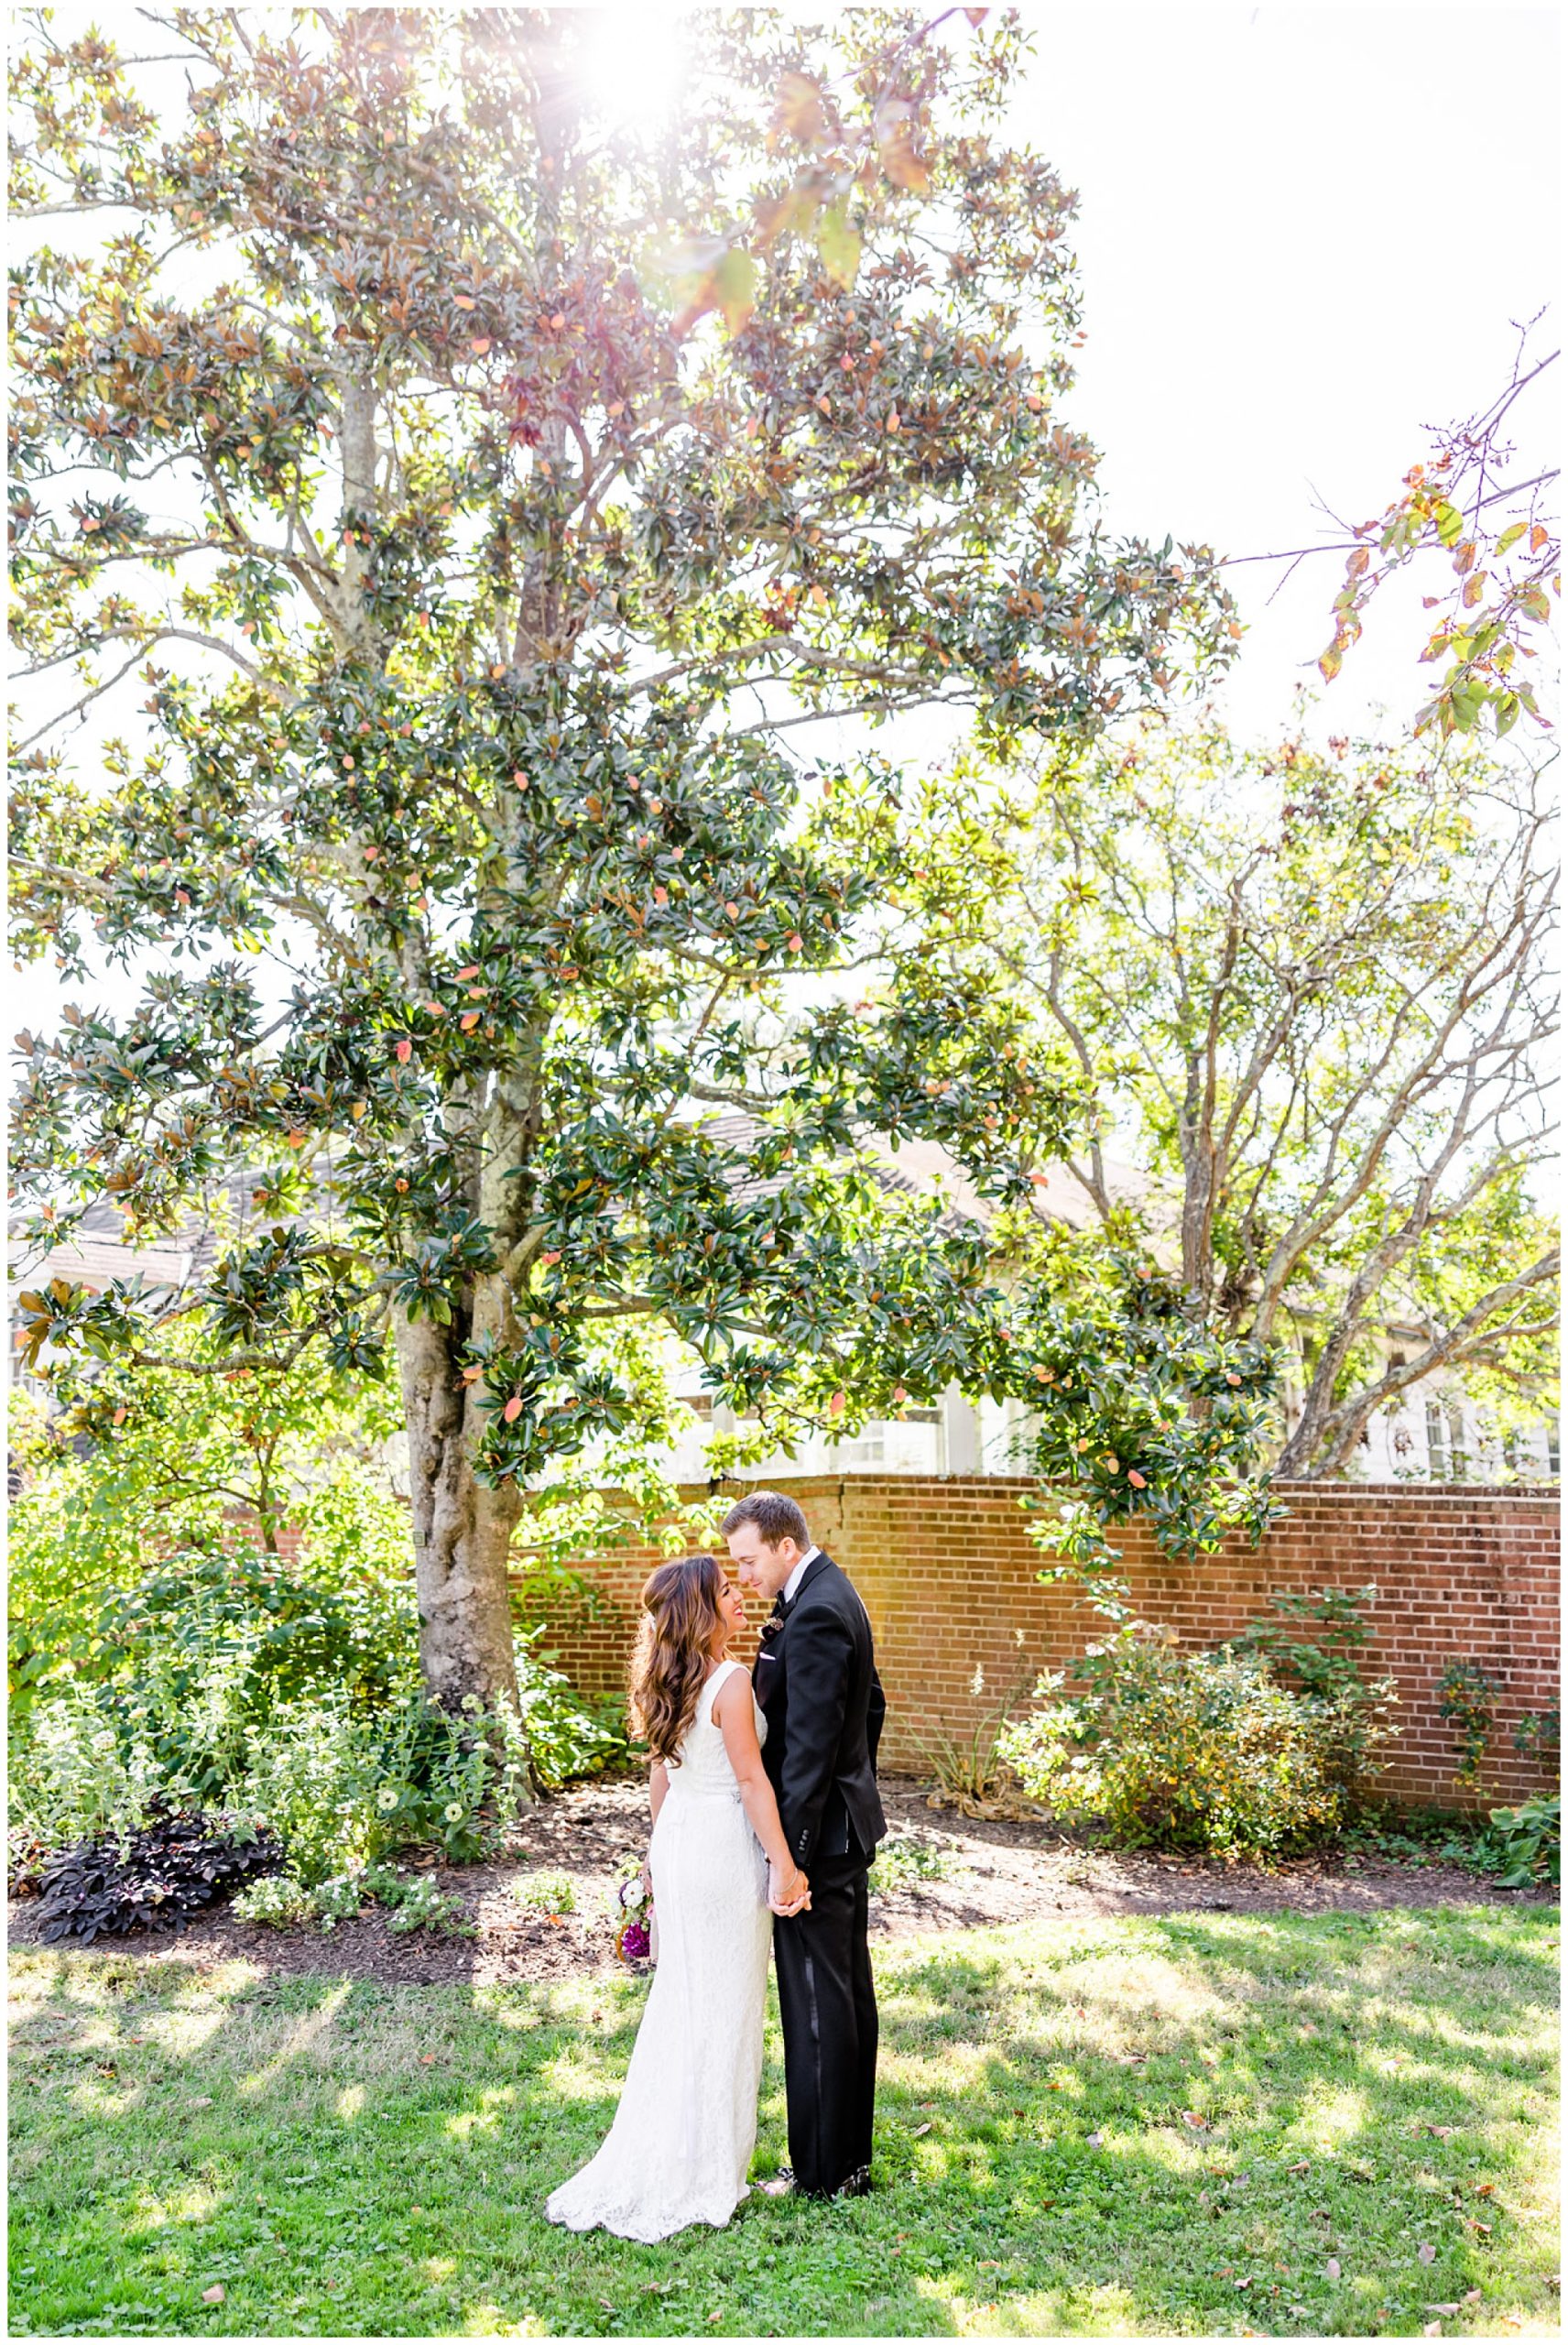 early autumn River Farm wedding, Alexandria Virginia wedding, Alexandria wedding venues, Alexandria Virginia photographer, Alexandria wedding photographer, DC wedding photographer, DC wedding venues, DC wedding photography, waterfront wedding venue, DC autumn wedding, DC natural light wedding photographer, DC natural light wedding photographer, Rachel E.H. Photography, couple almost kissing, yard with tree canopy, couple with faces close